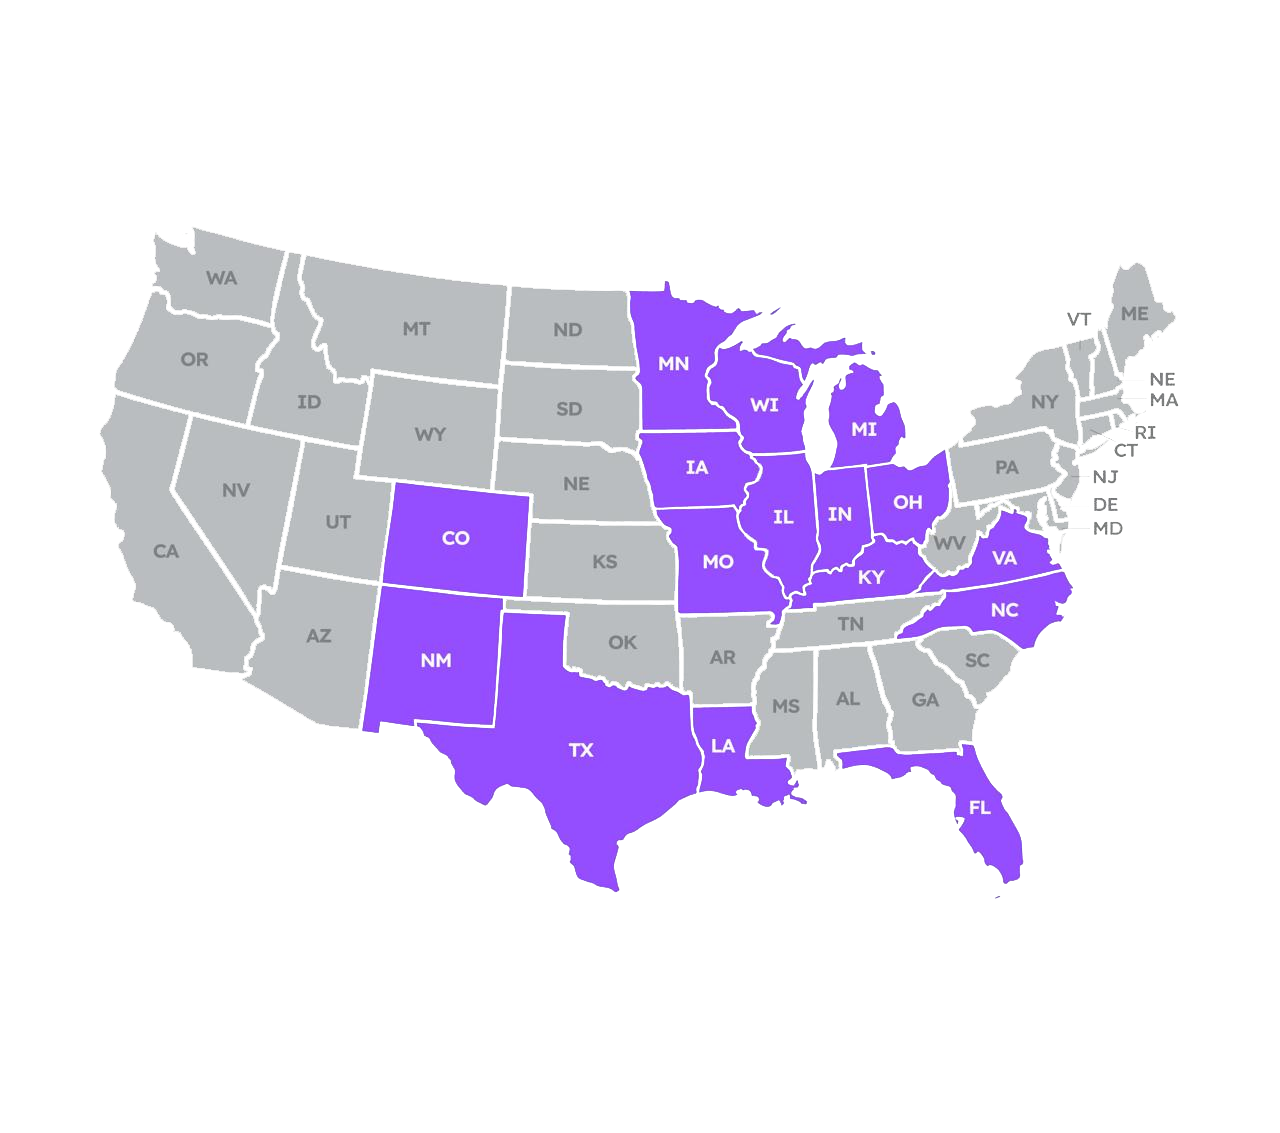 Metronet coverage map showing fiber internet availability